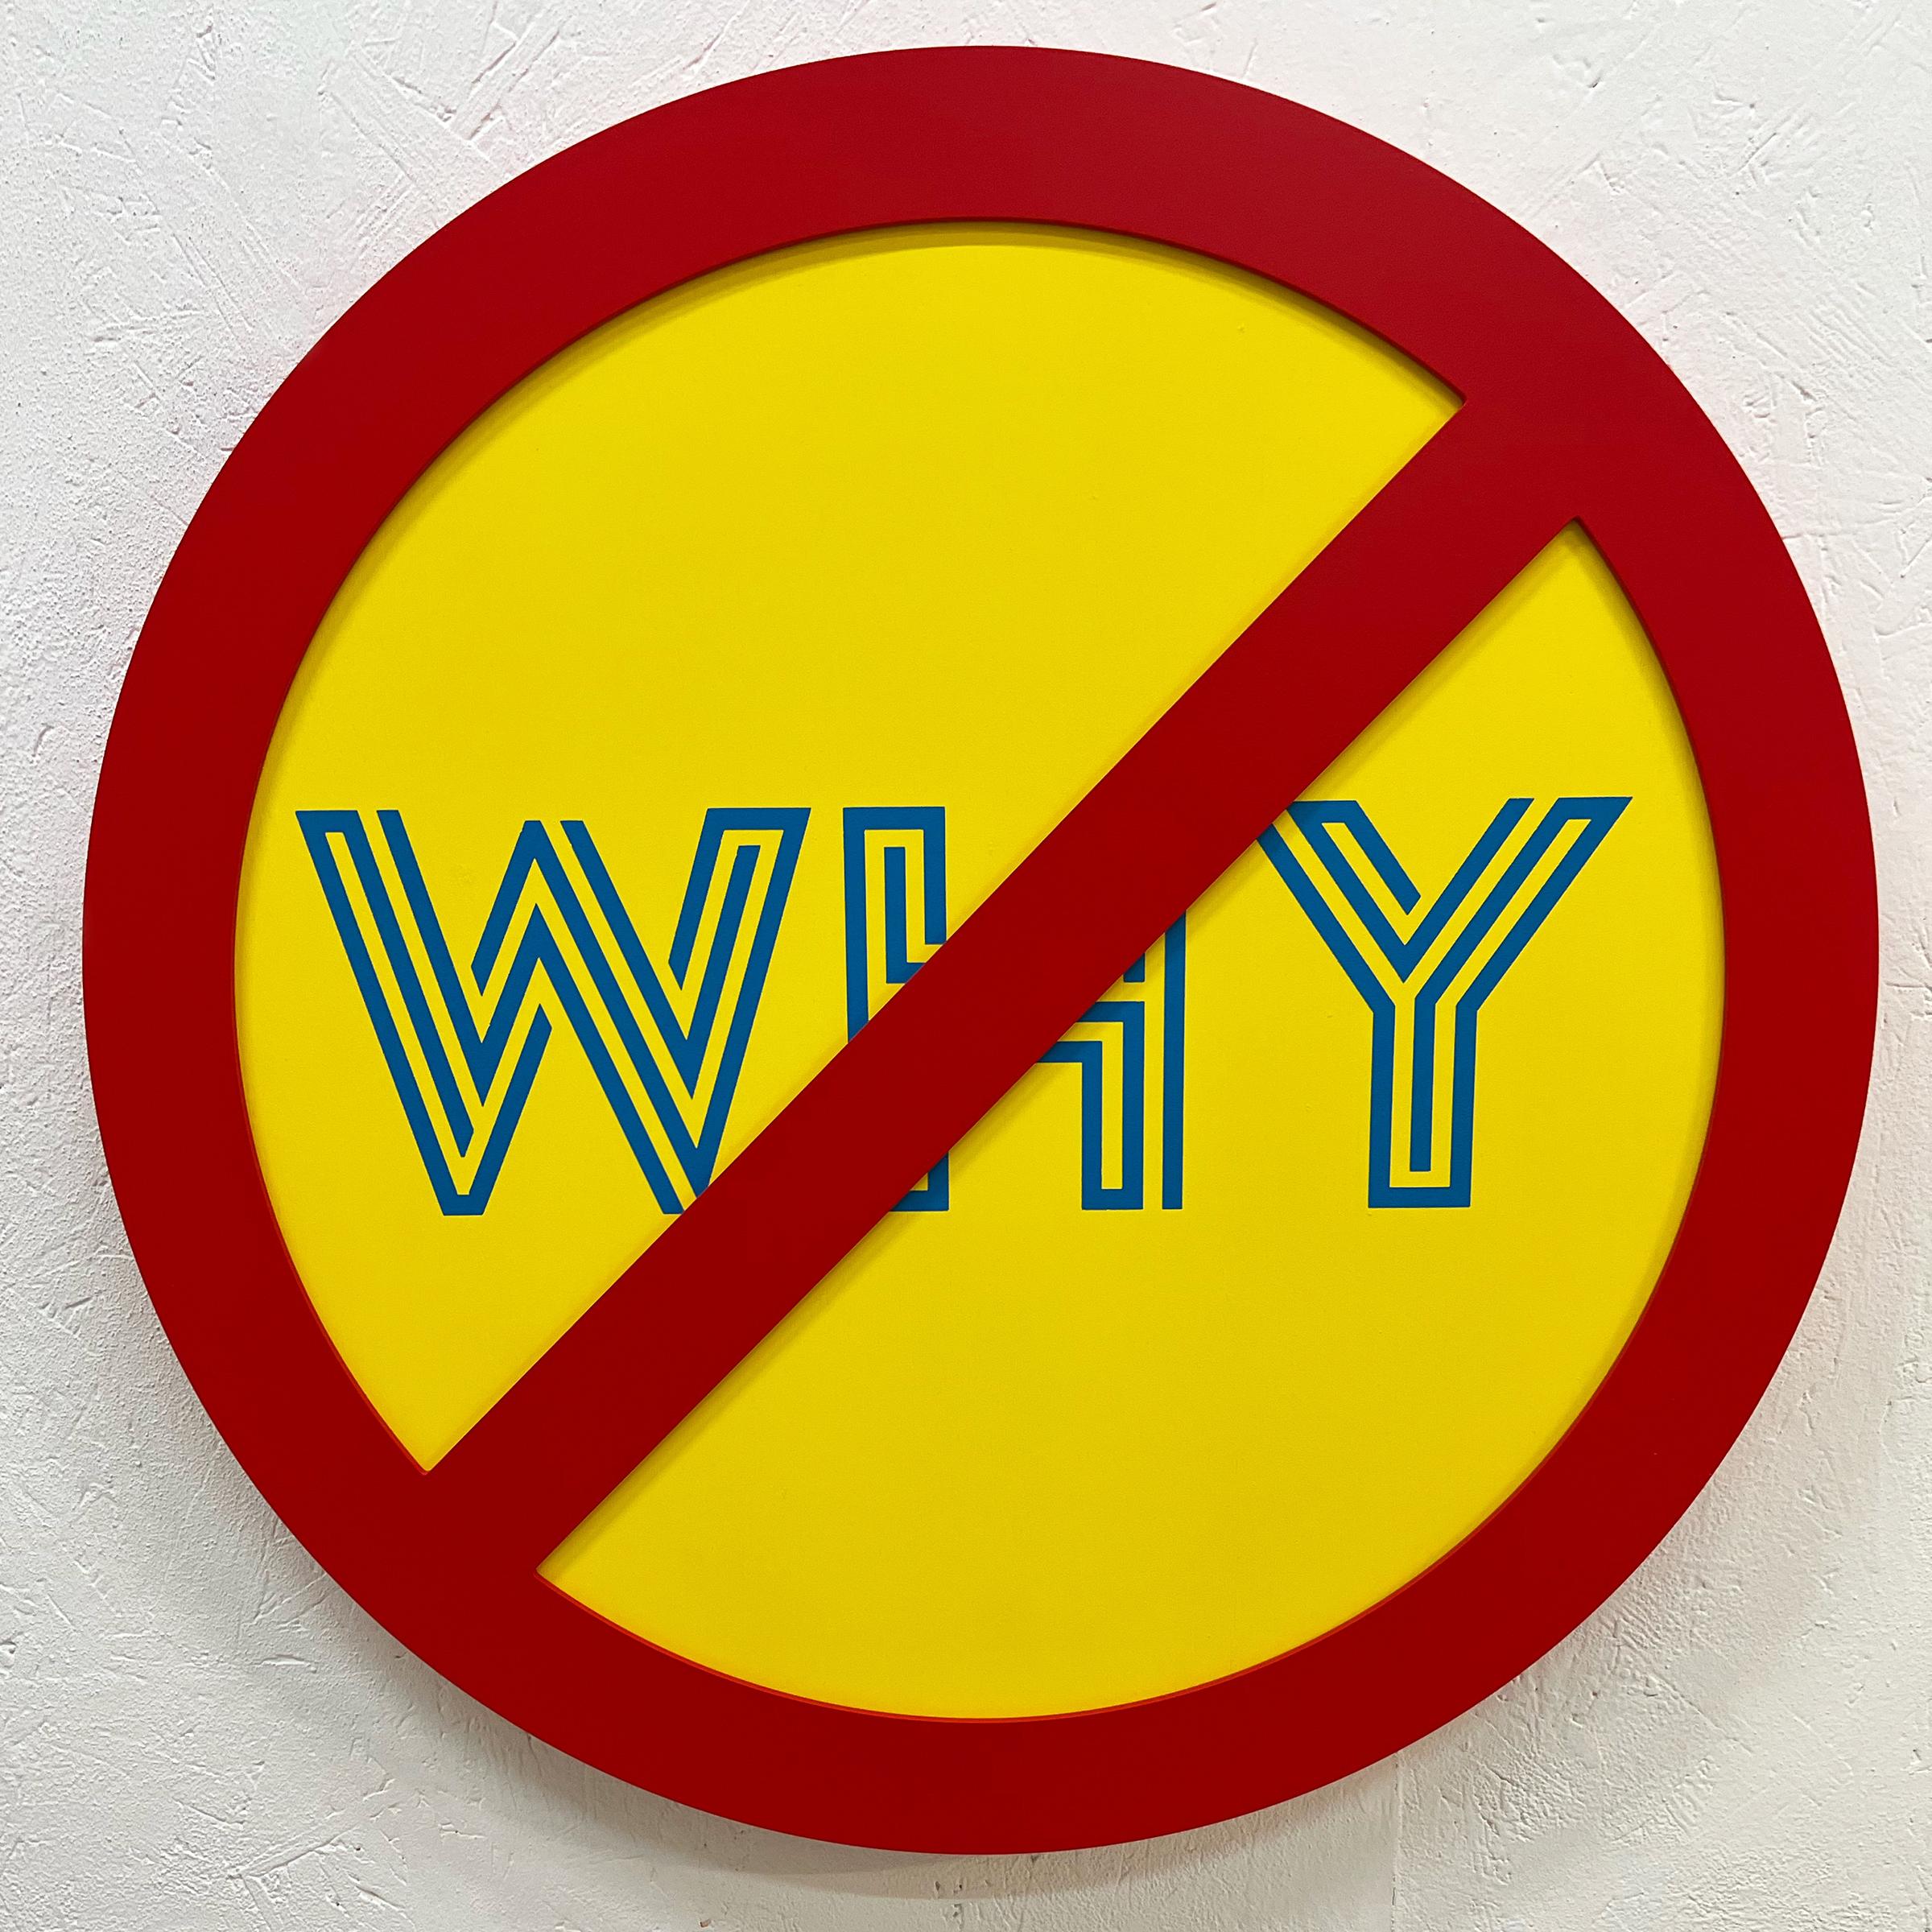 Michael Porten Abstract Painting - "No Why (Blue on Yellow)" - conceptual art, wall sculpture - Lawrence Weiner